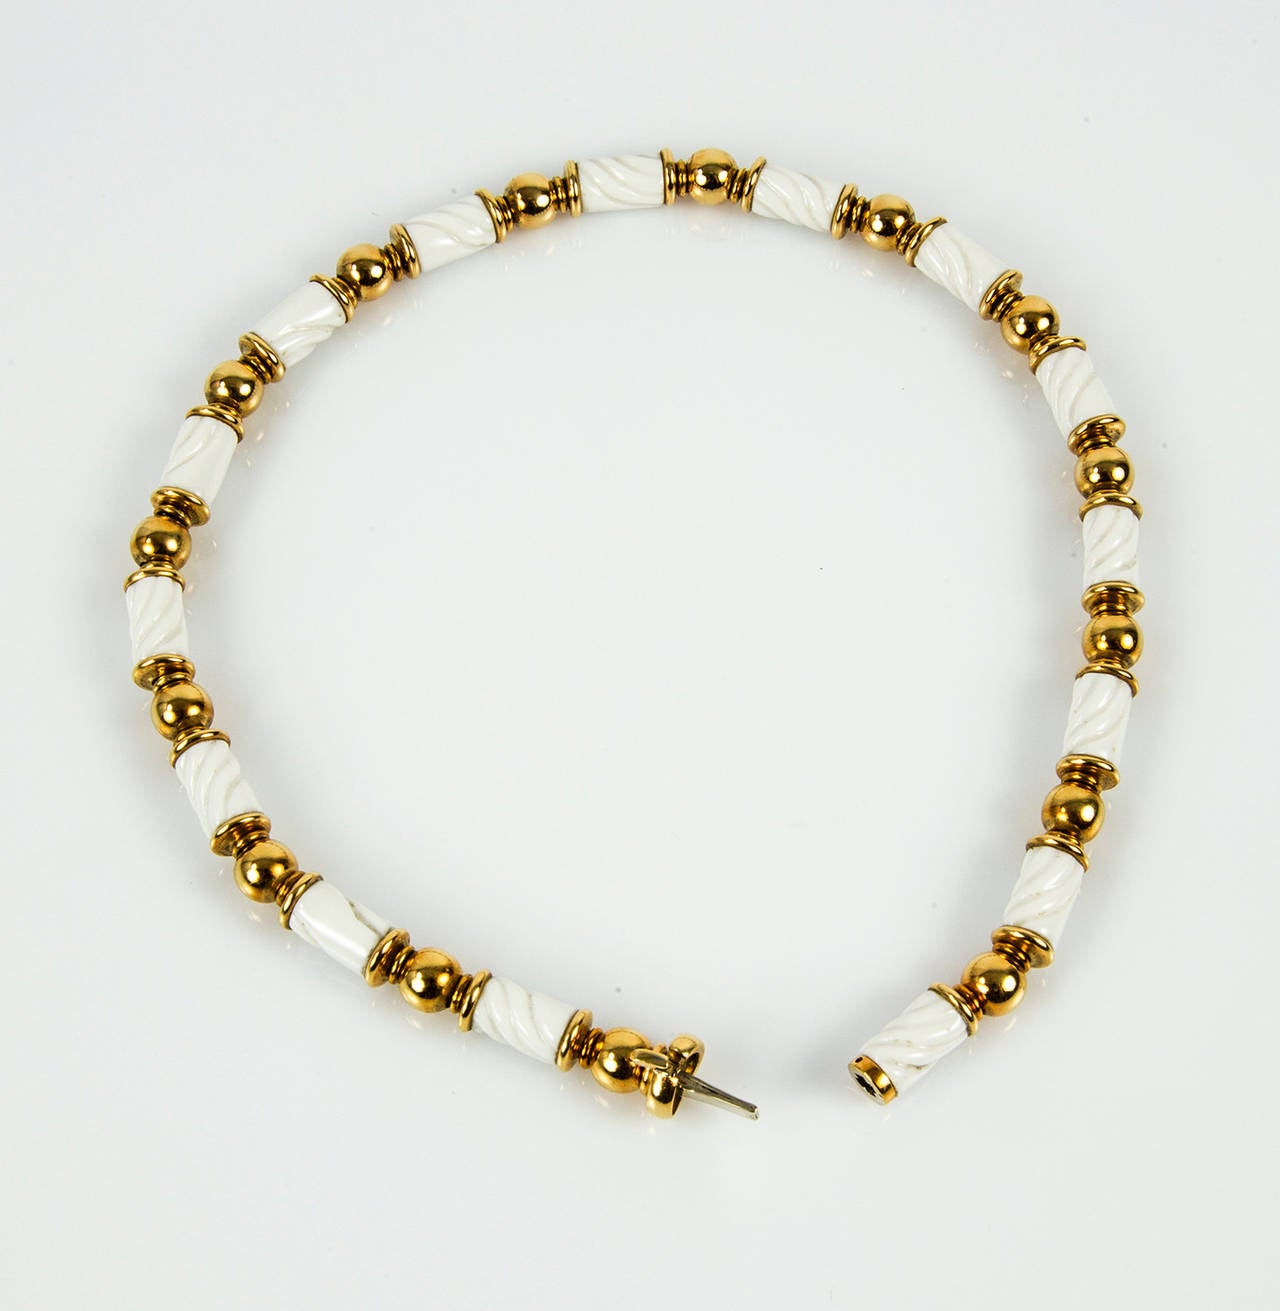 Beautifully crafted Necklace in 18k Yellow Gold inter spaced with 15 White Ceramic beads; Necklace measures approx. 15 5/8